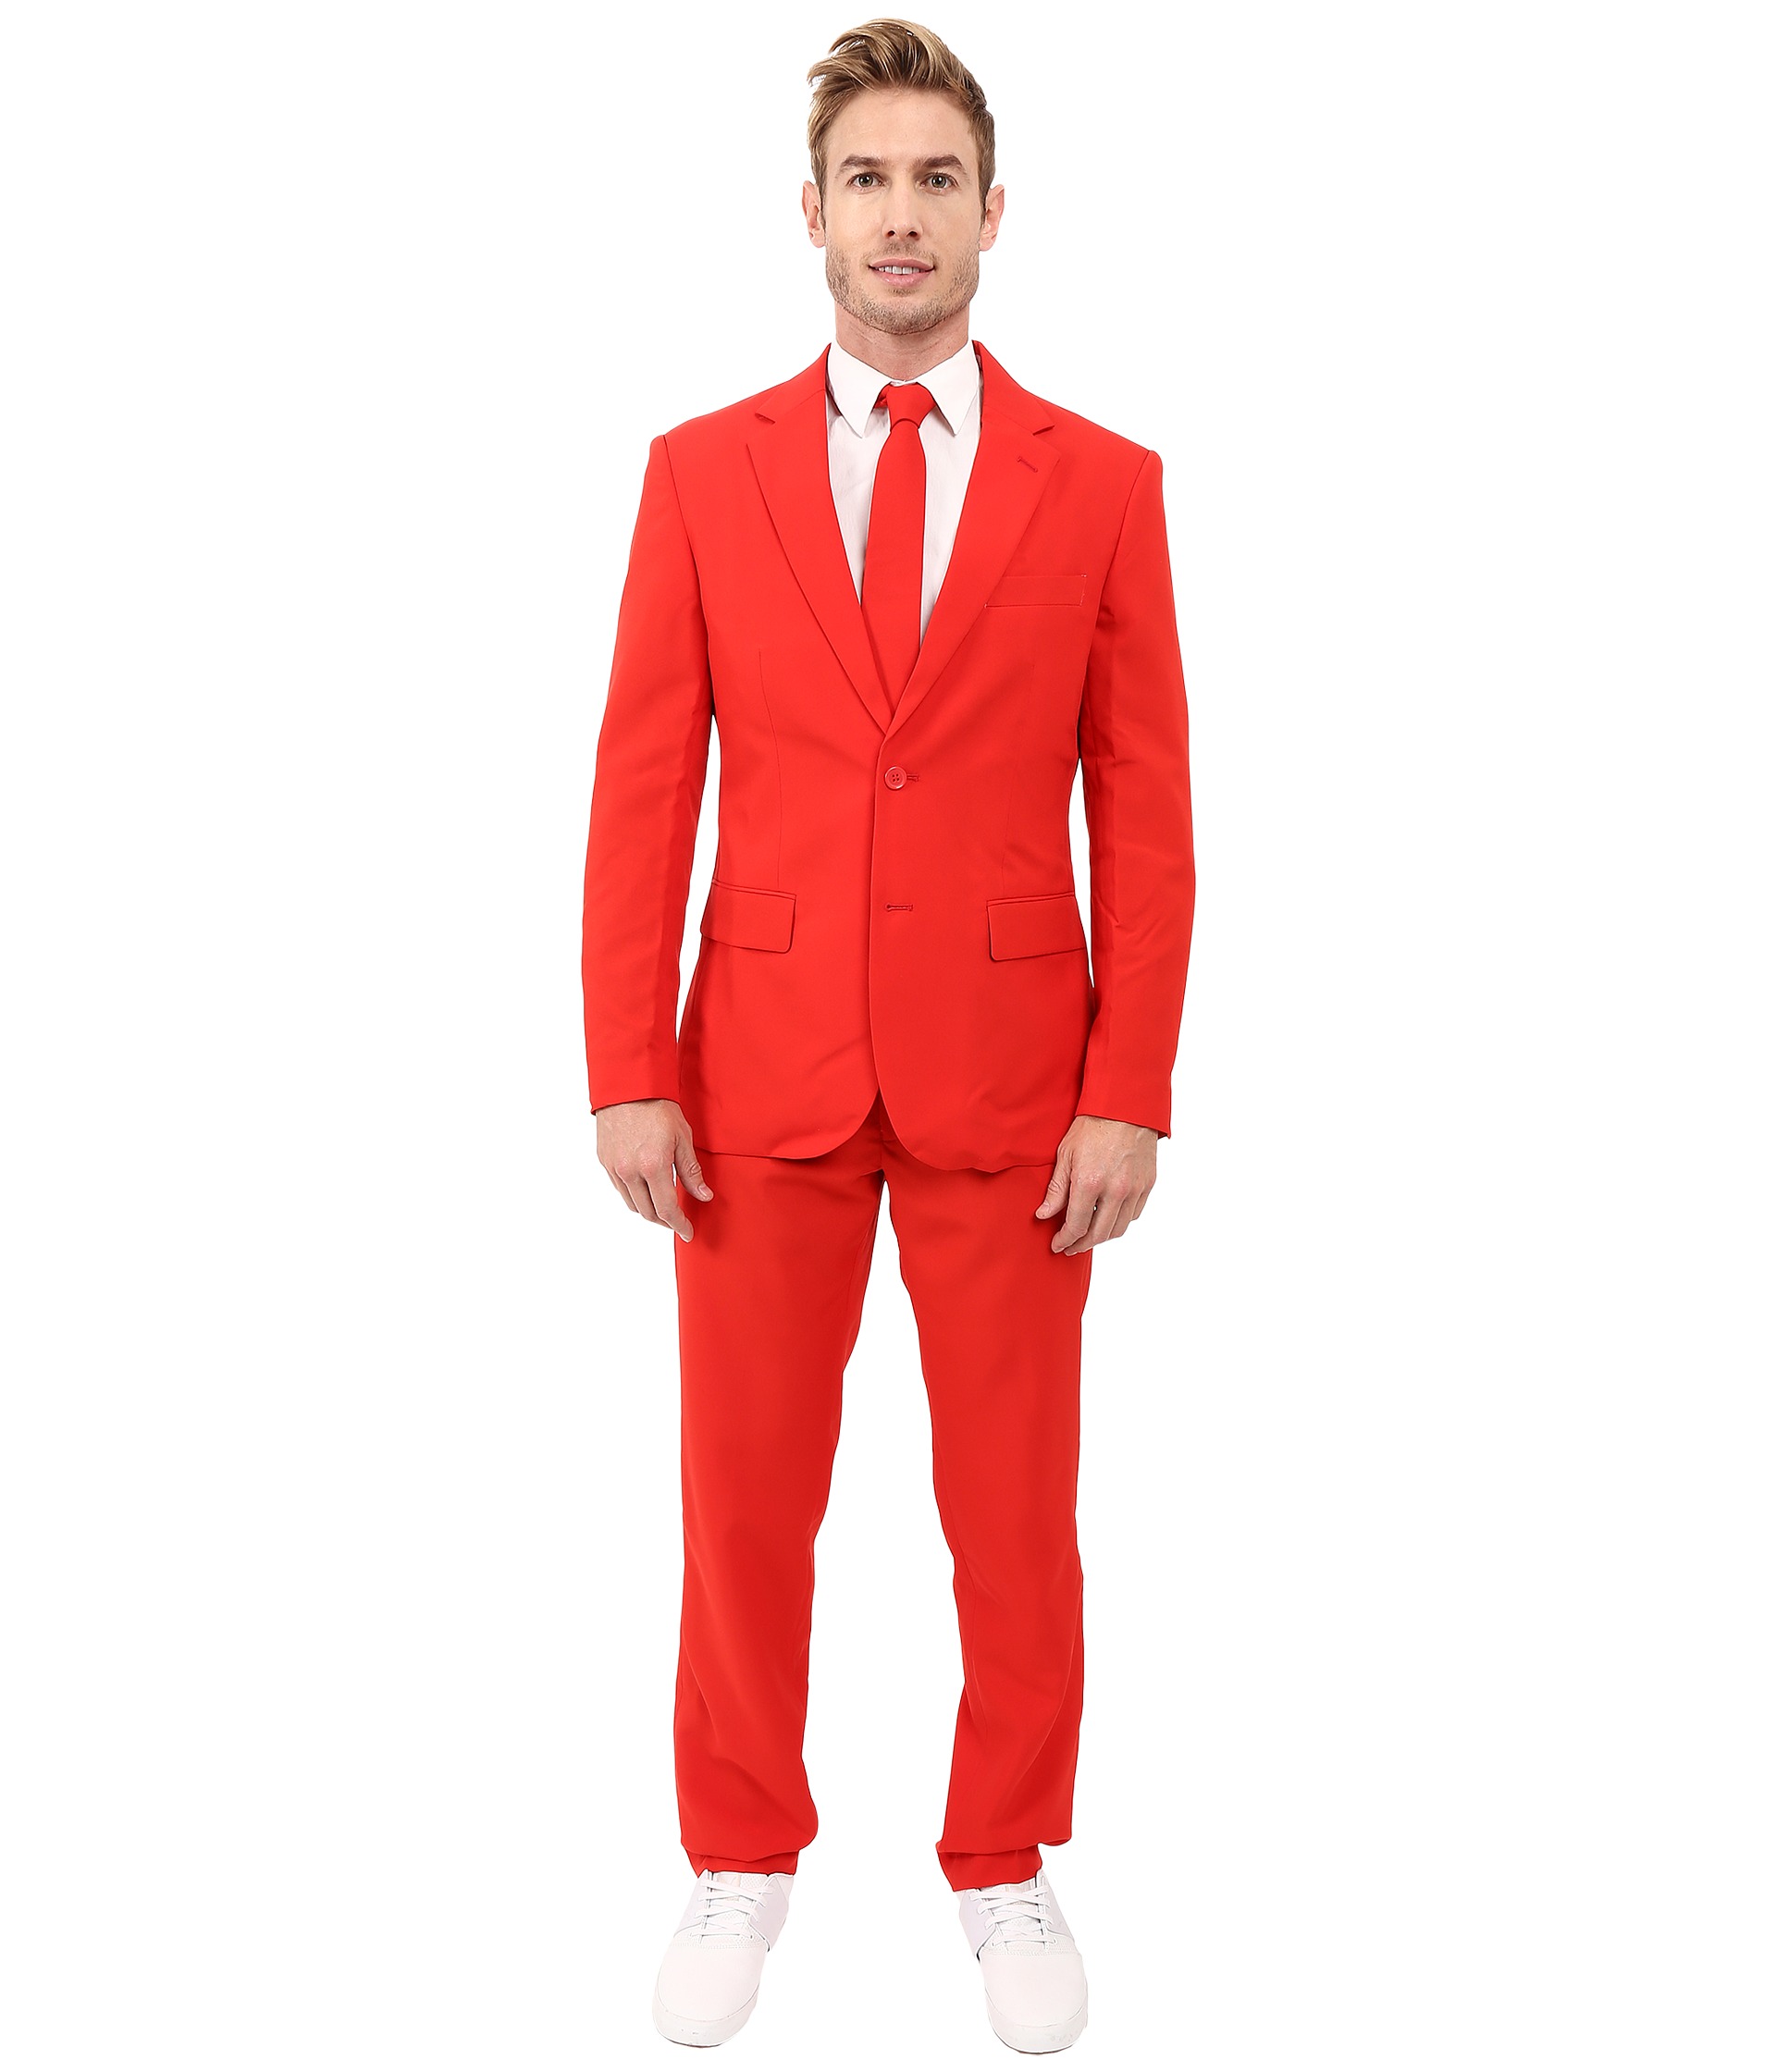 OppoSuits Red Devil Suit - Zappos.com Free Shipping BOTH Ways